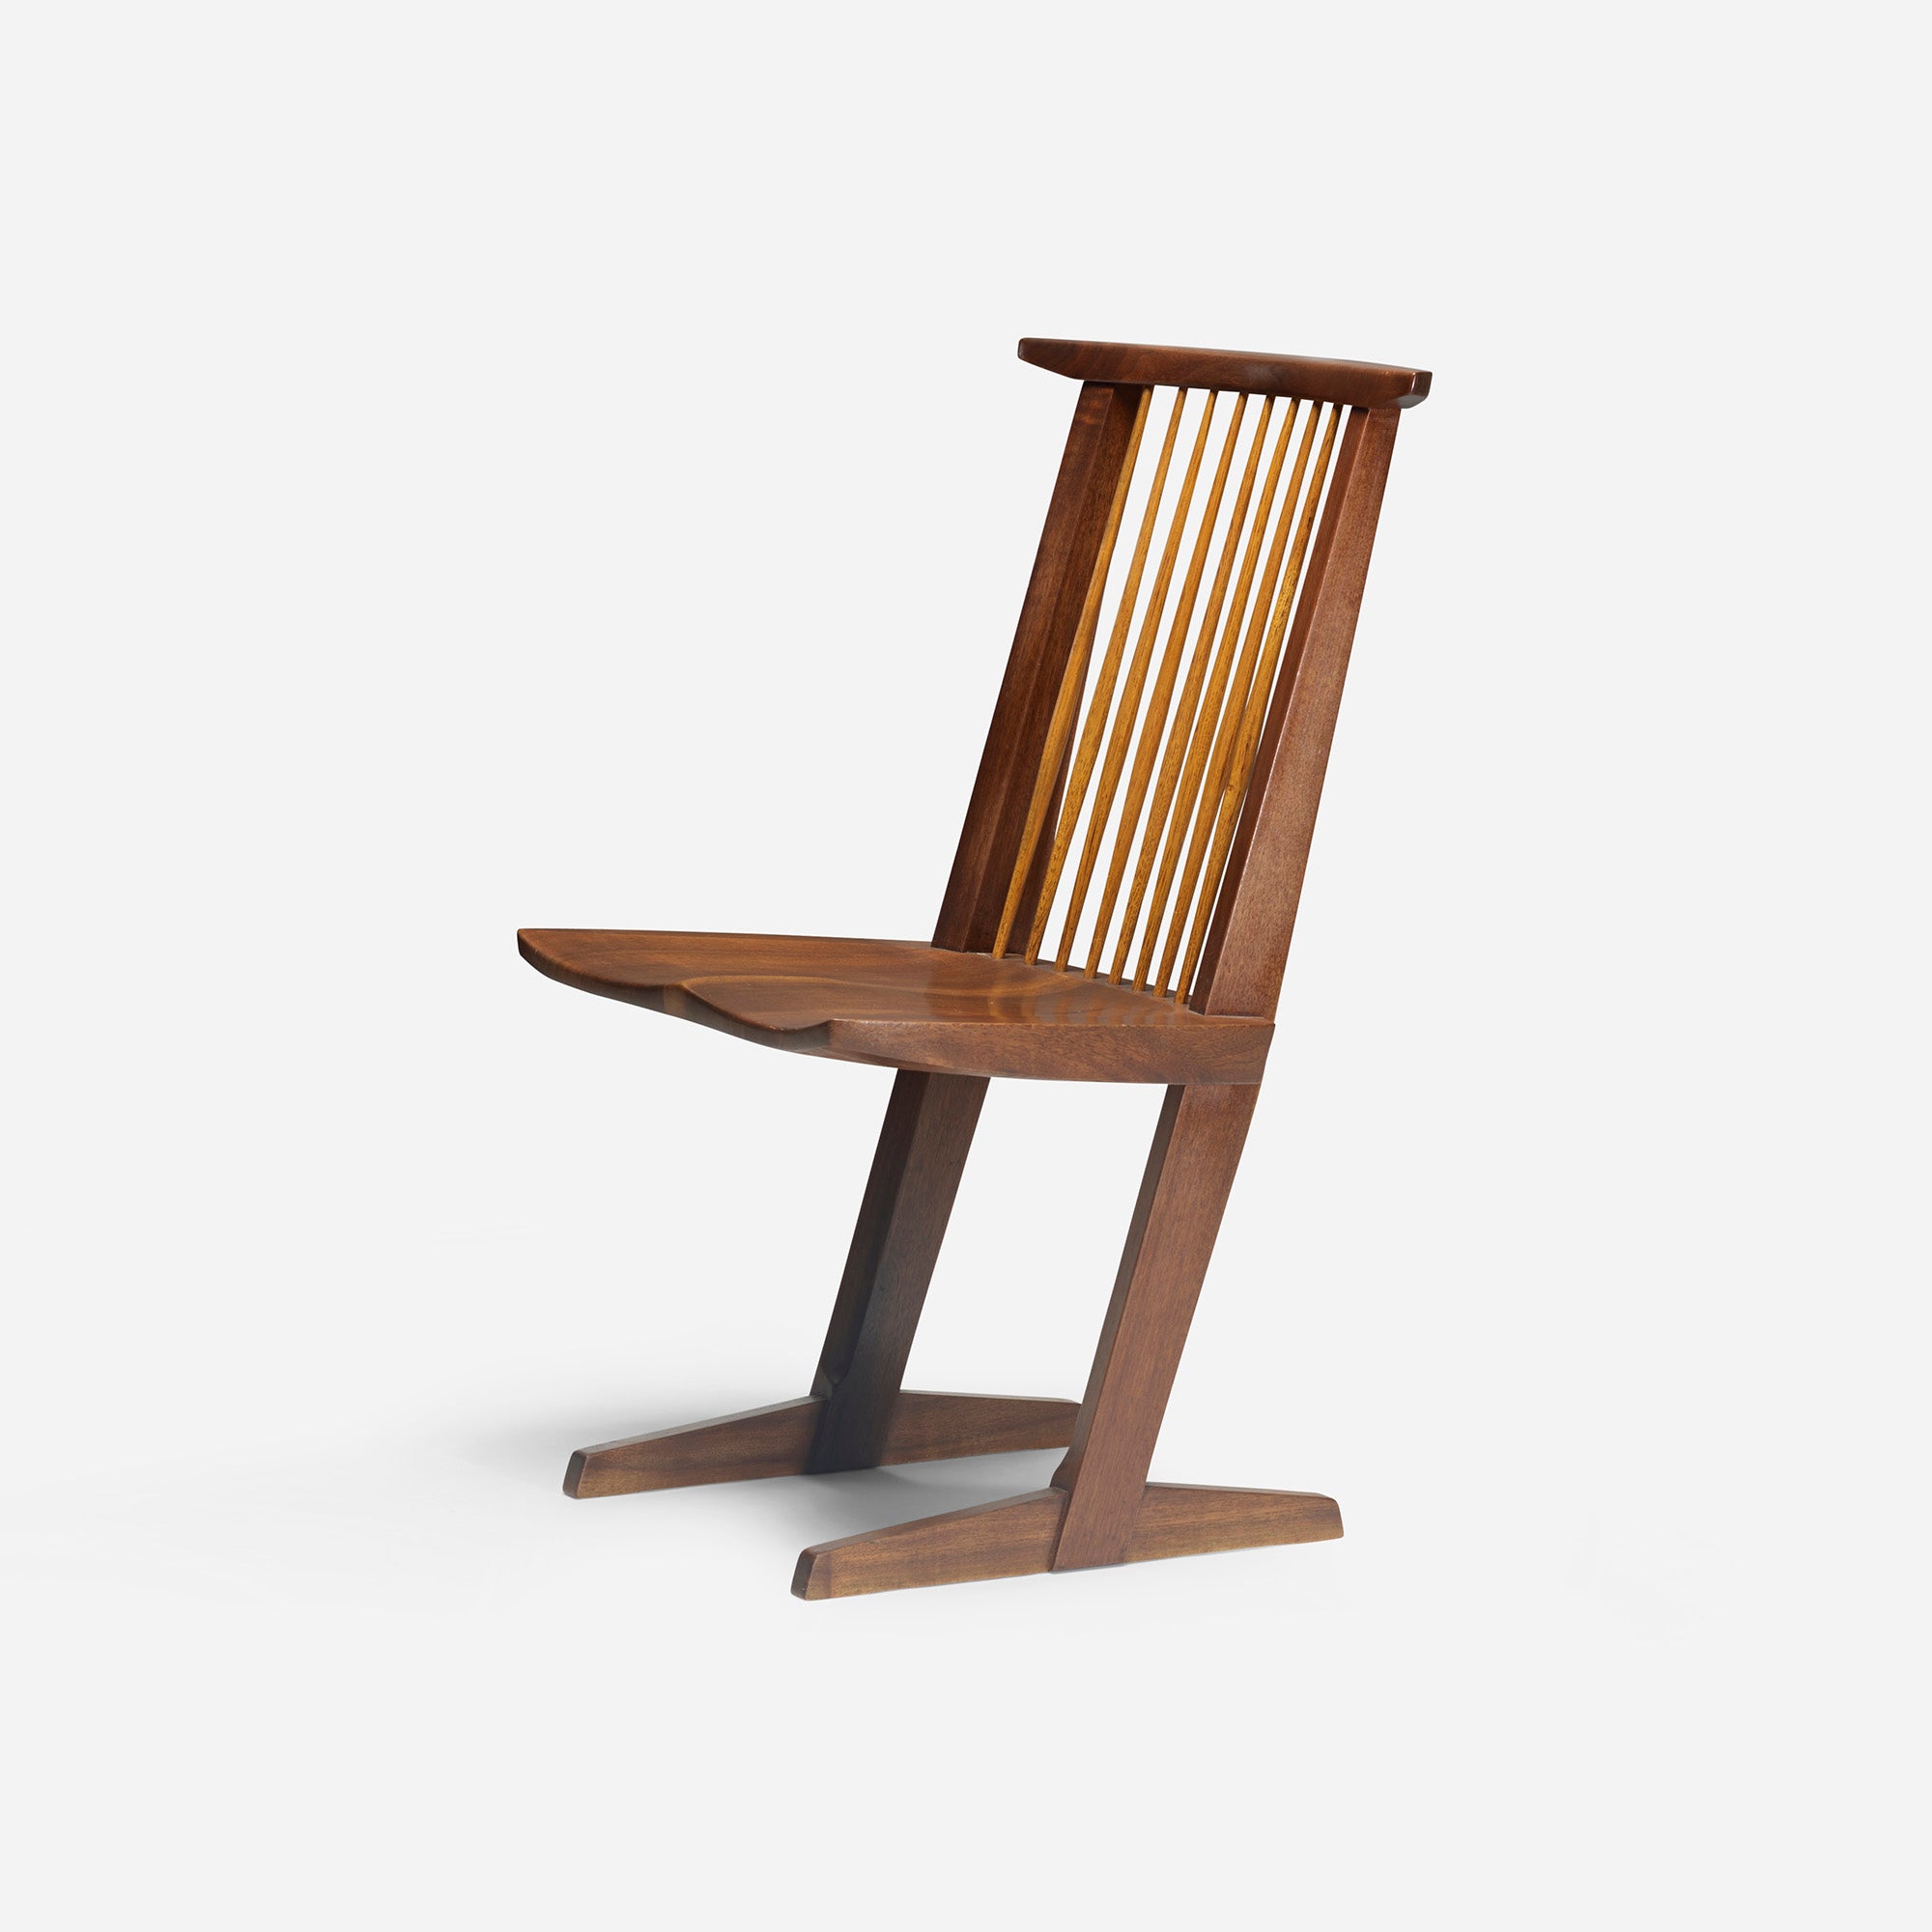 Conoid chair by George Nakashima For Sale